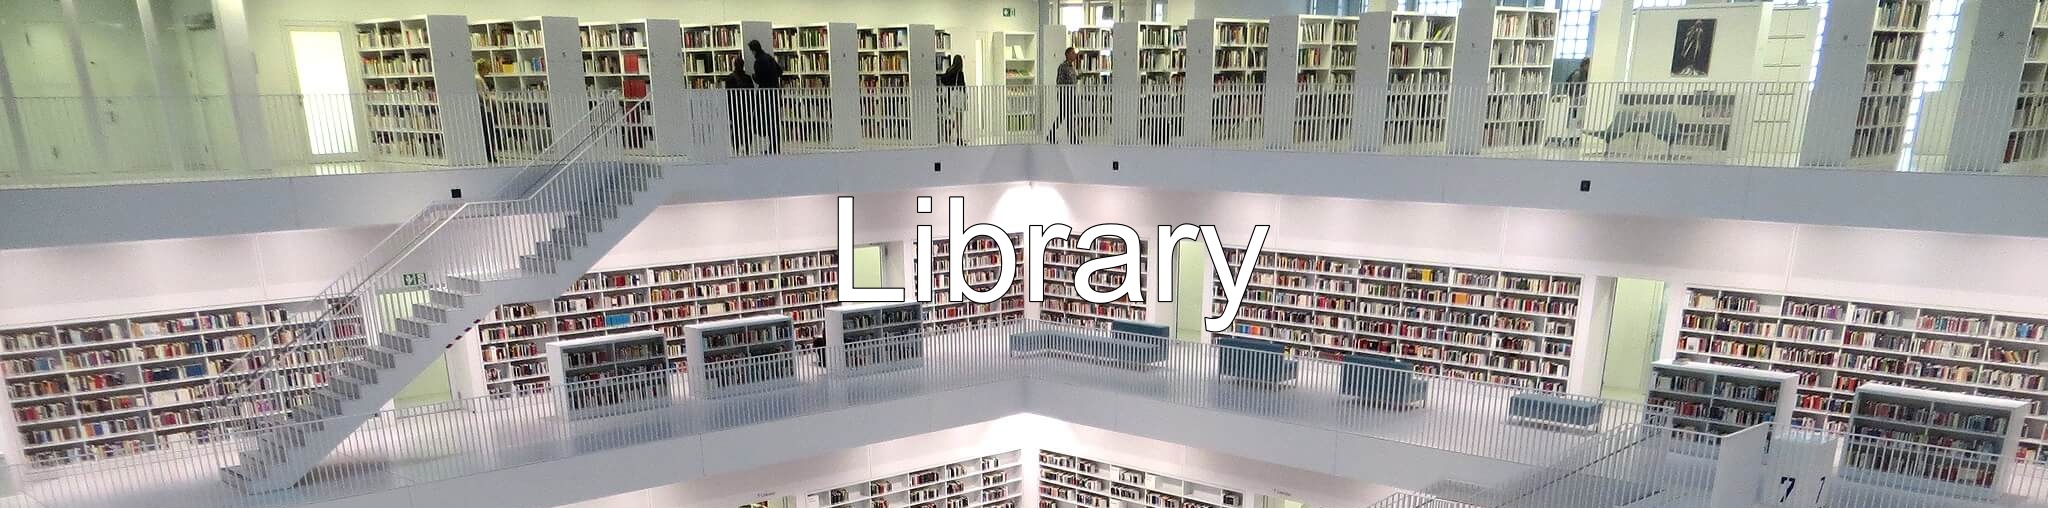 library header w text